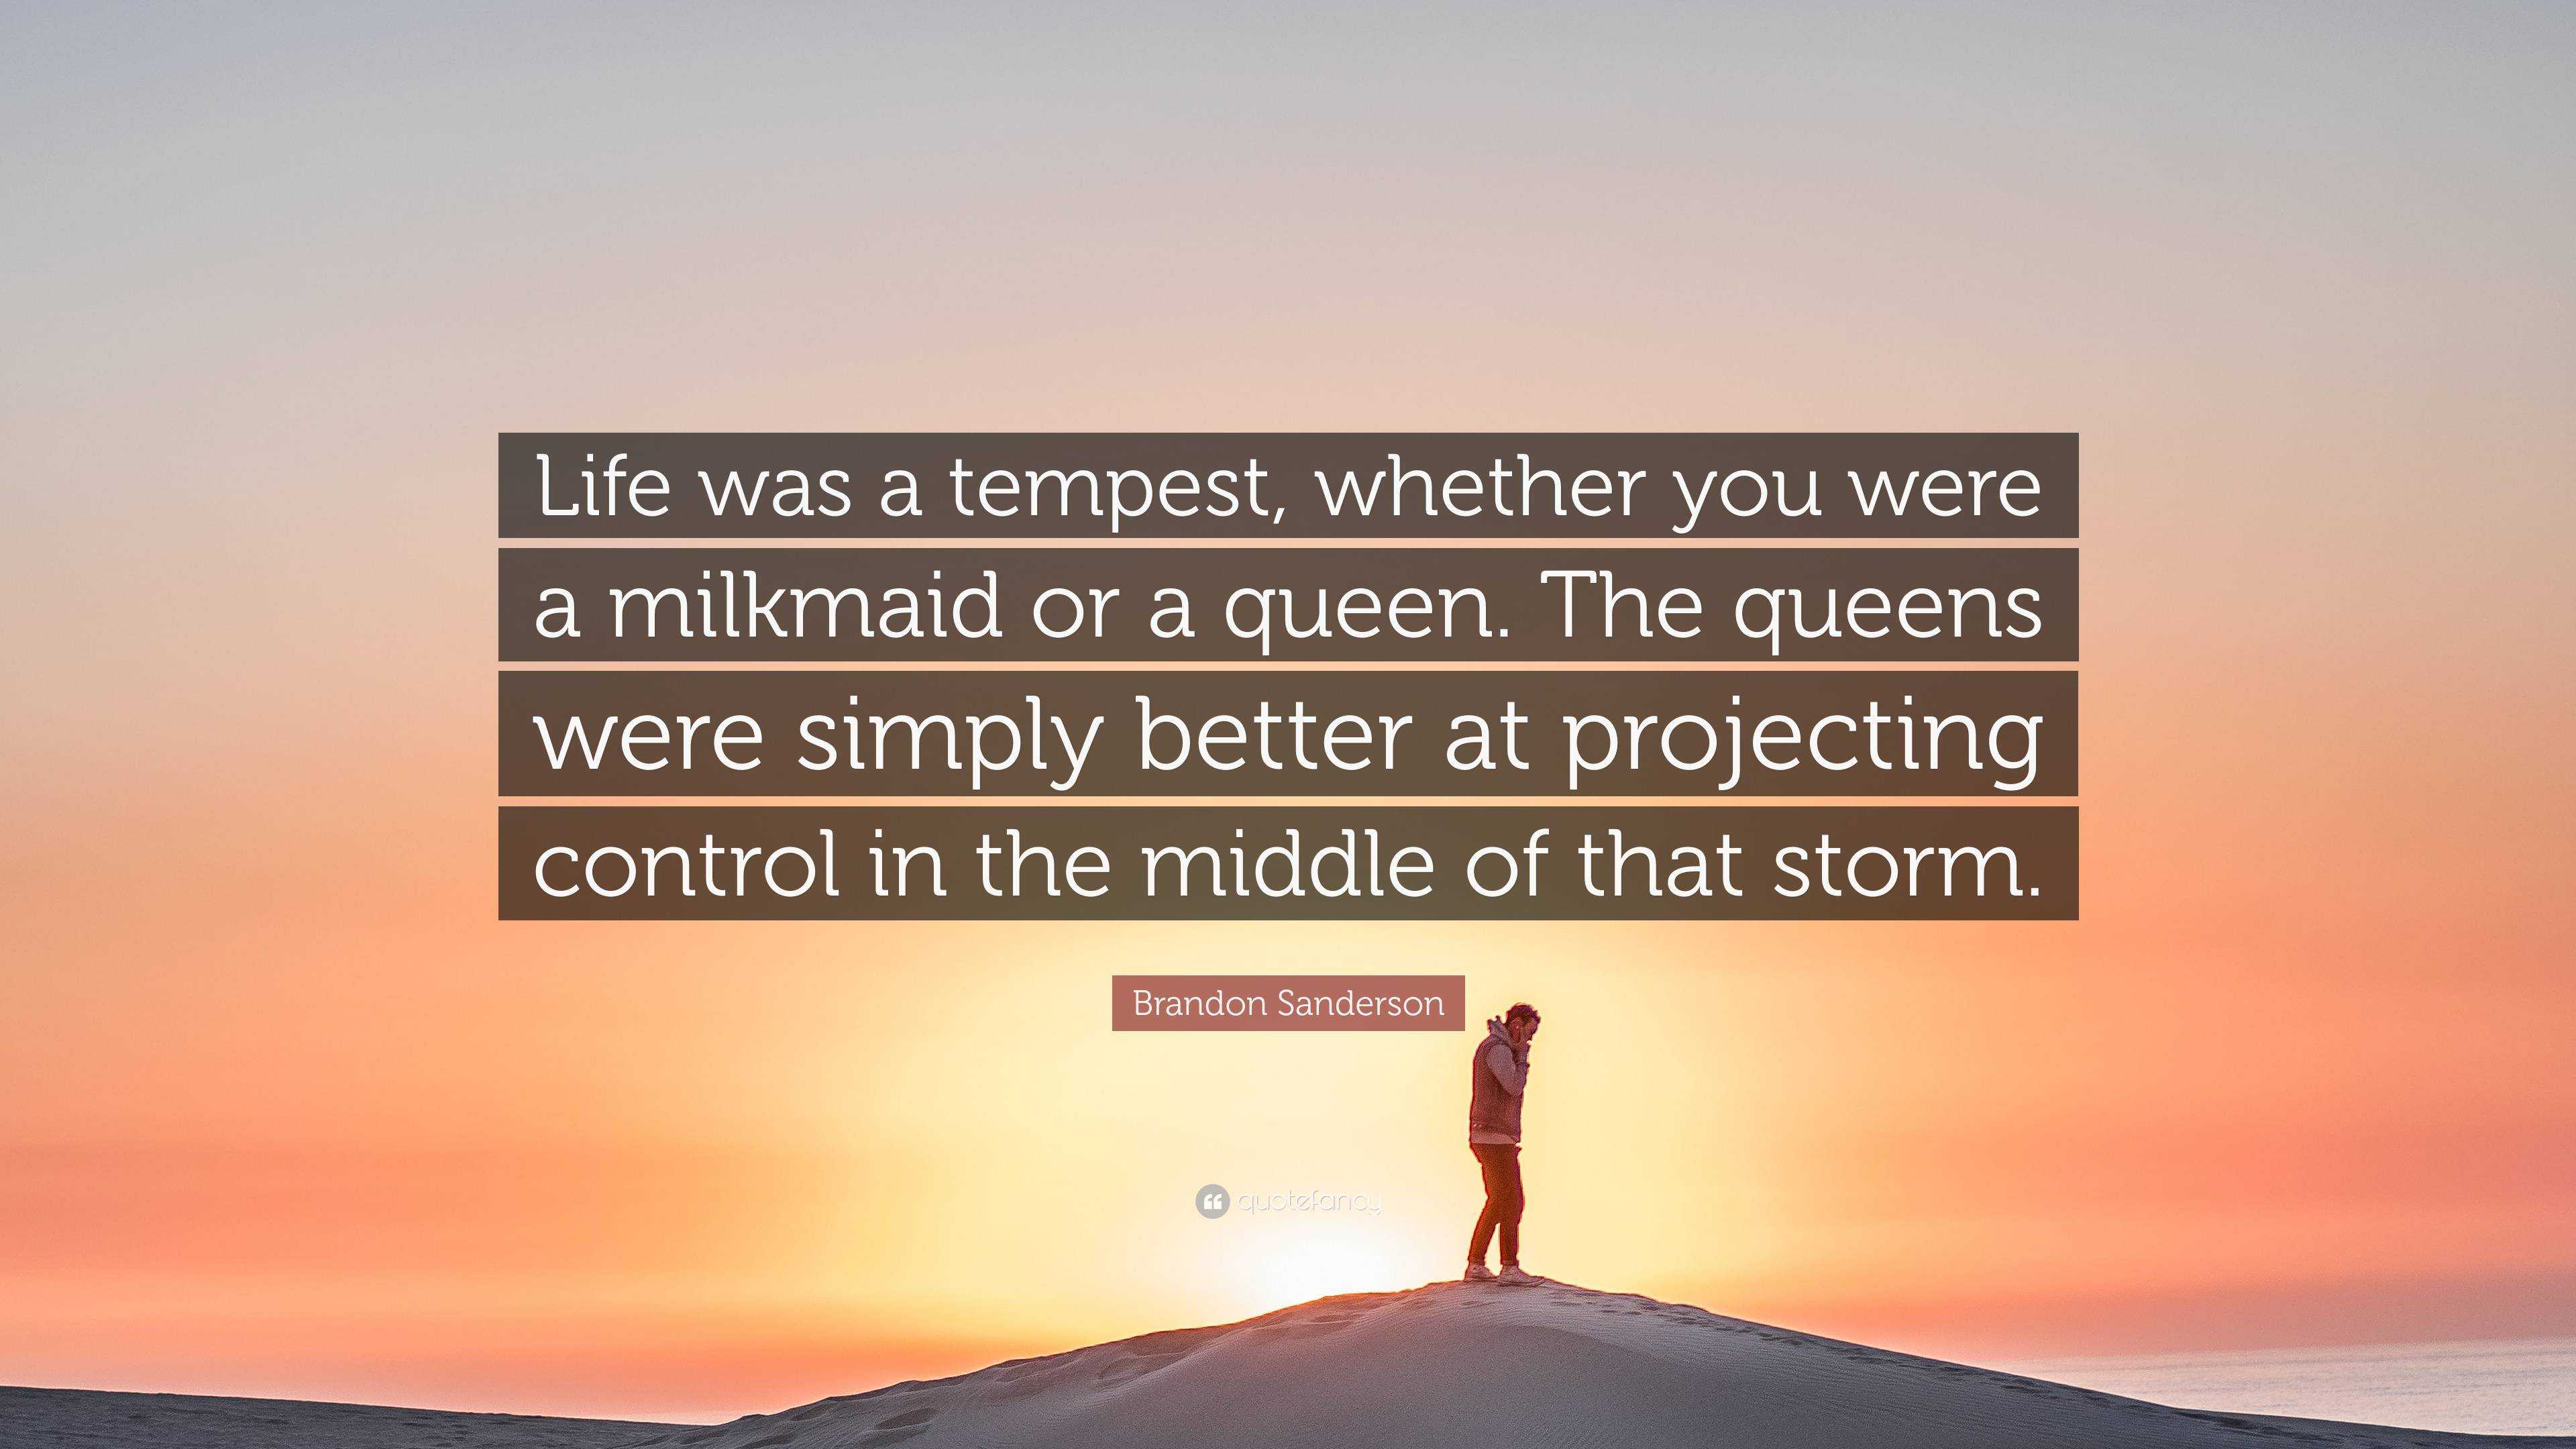 https://quotefancy.com/media/wallpaper/3840x2160/6527852-Brandon-Sanderson-Quote-Life-was-a-tempest-whether-you-were-a.jpg